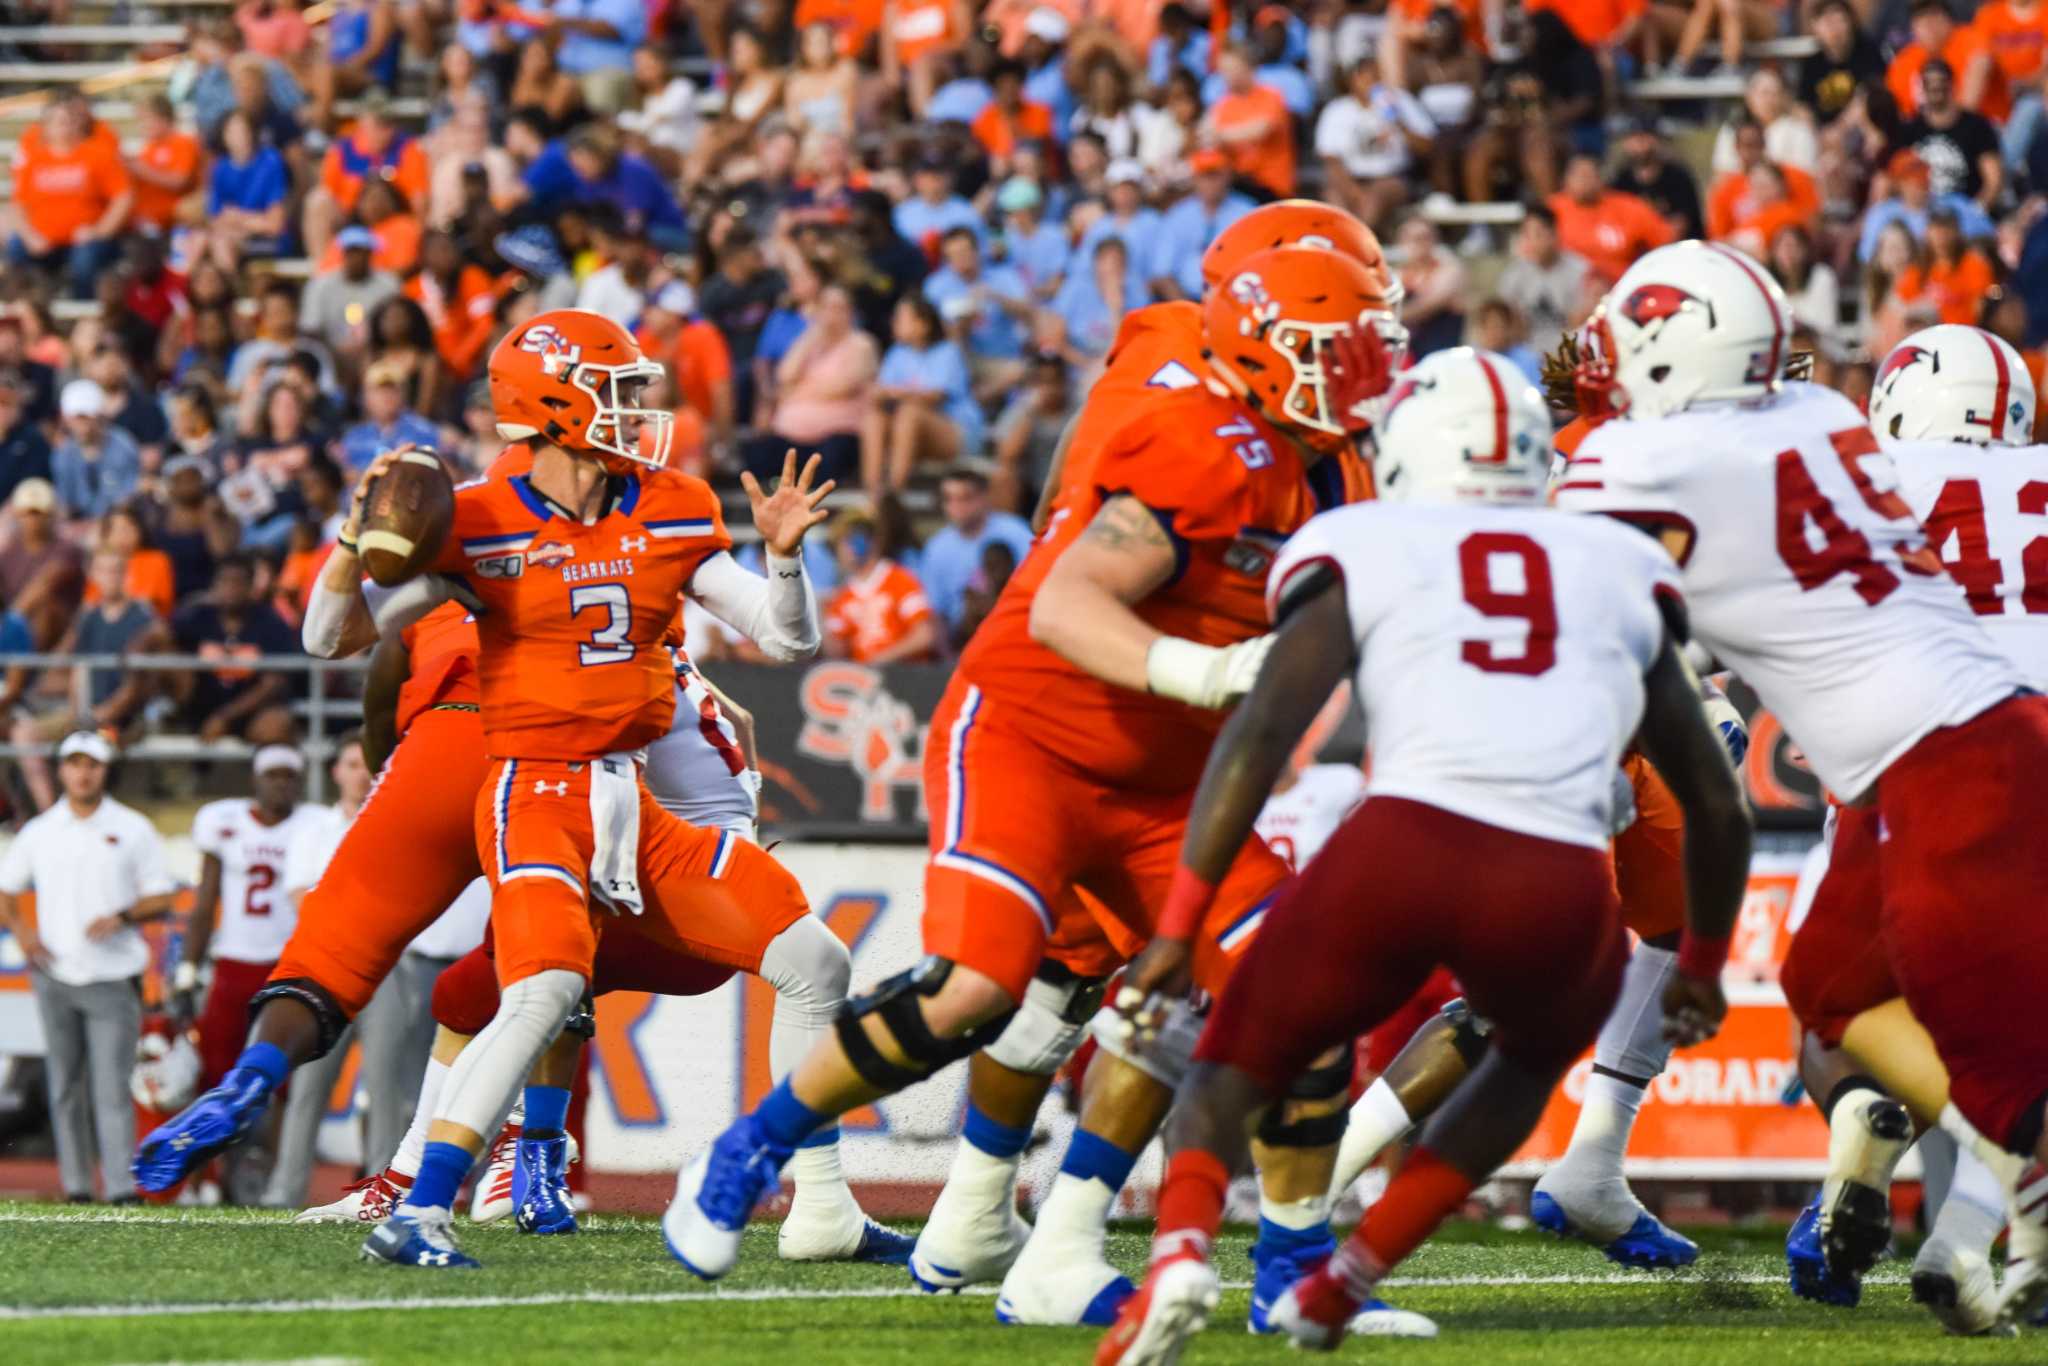 College football preview: Sam Houston State at McNeese